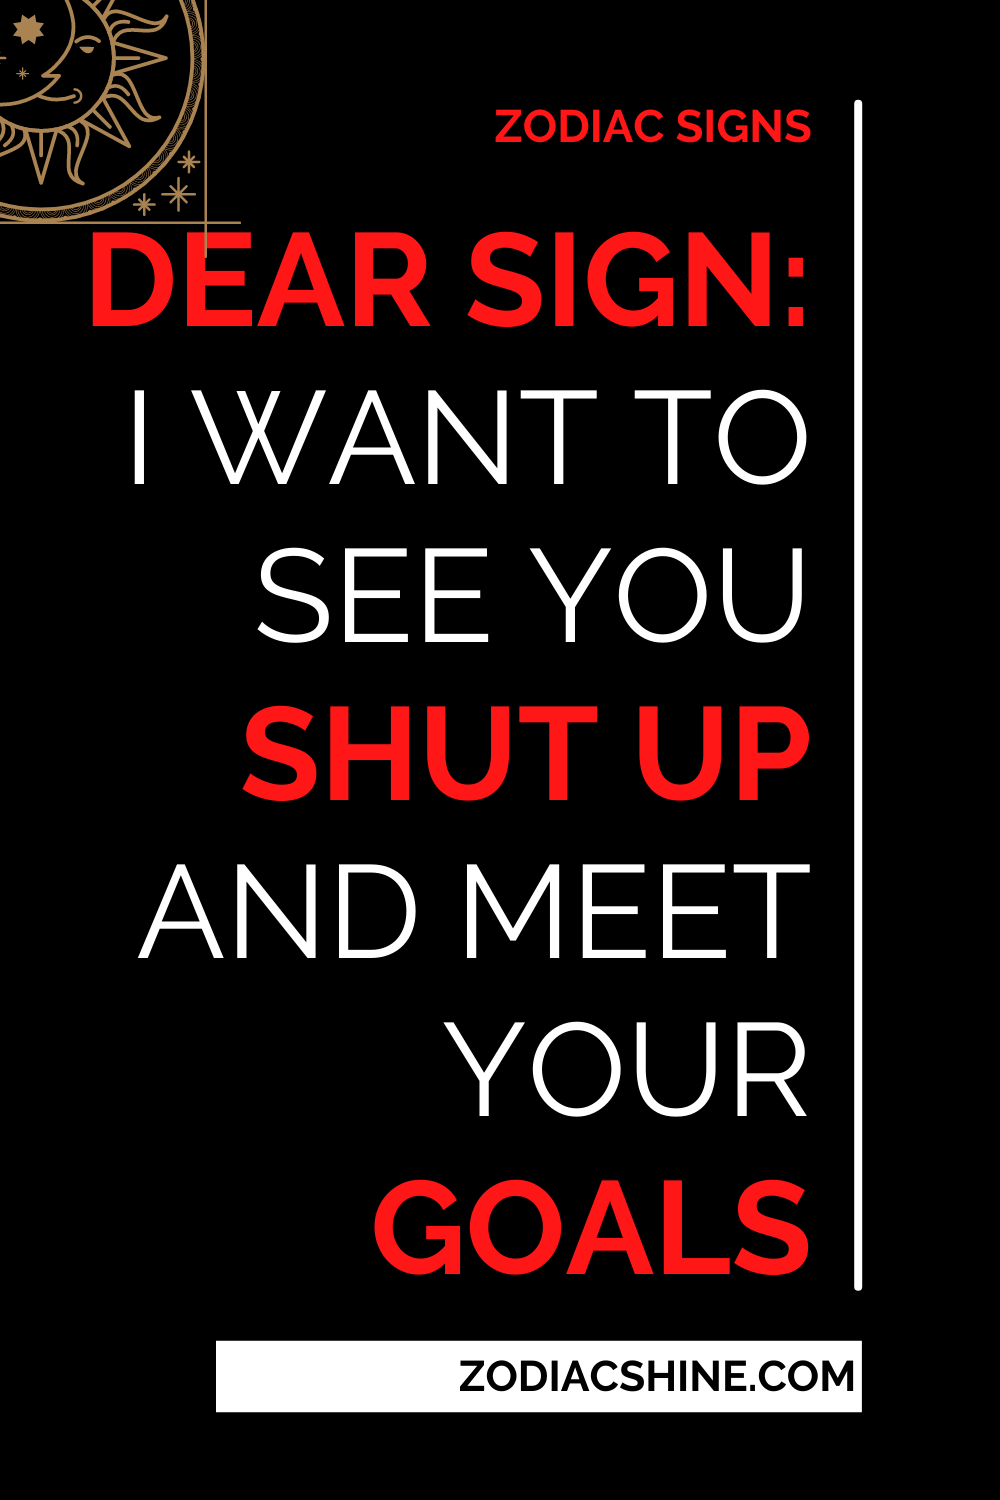 Dear Sign: I Want To See You Shut Up And Meet Your Goals